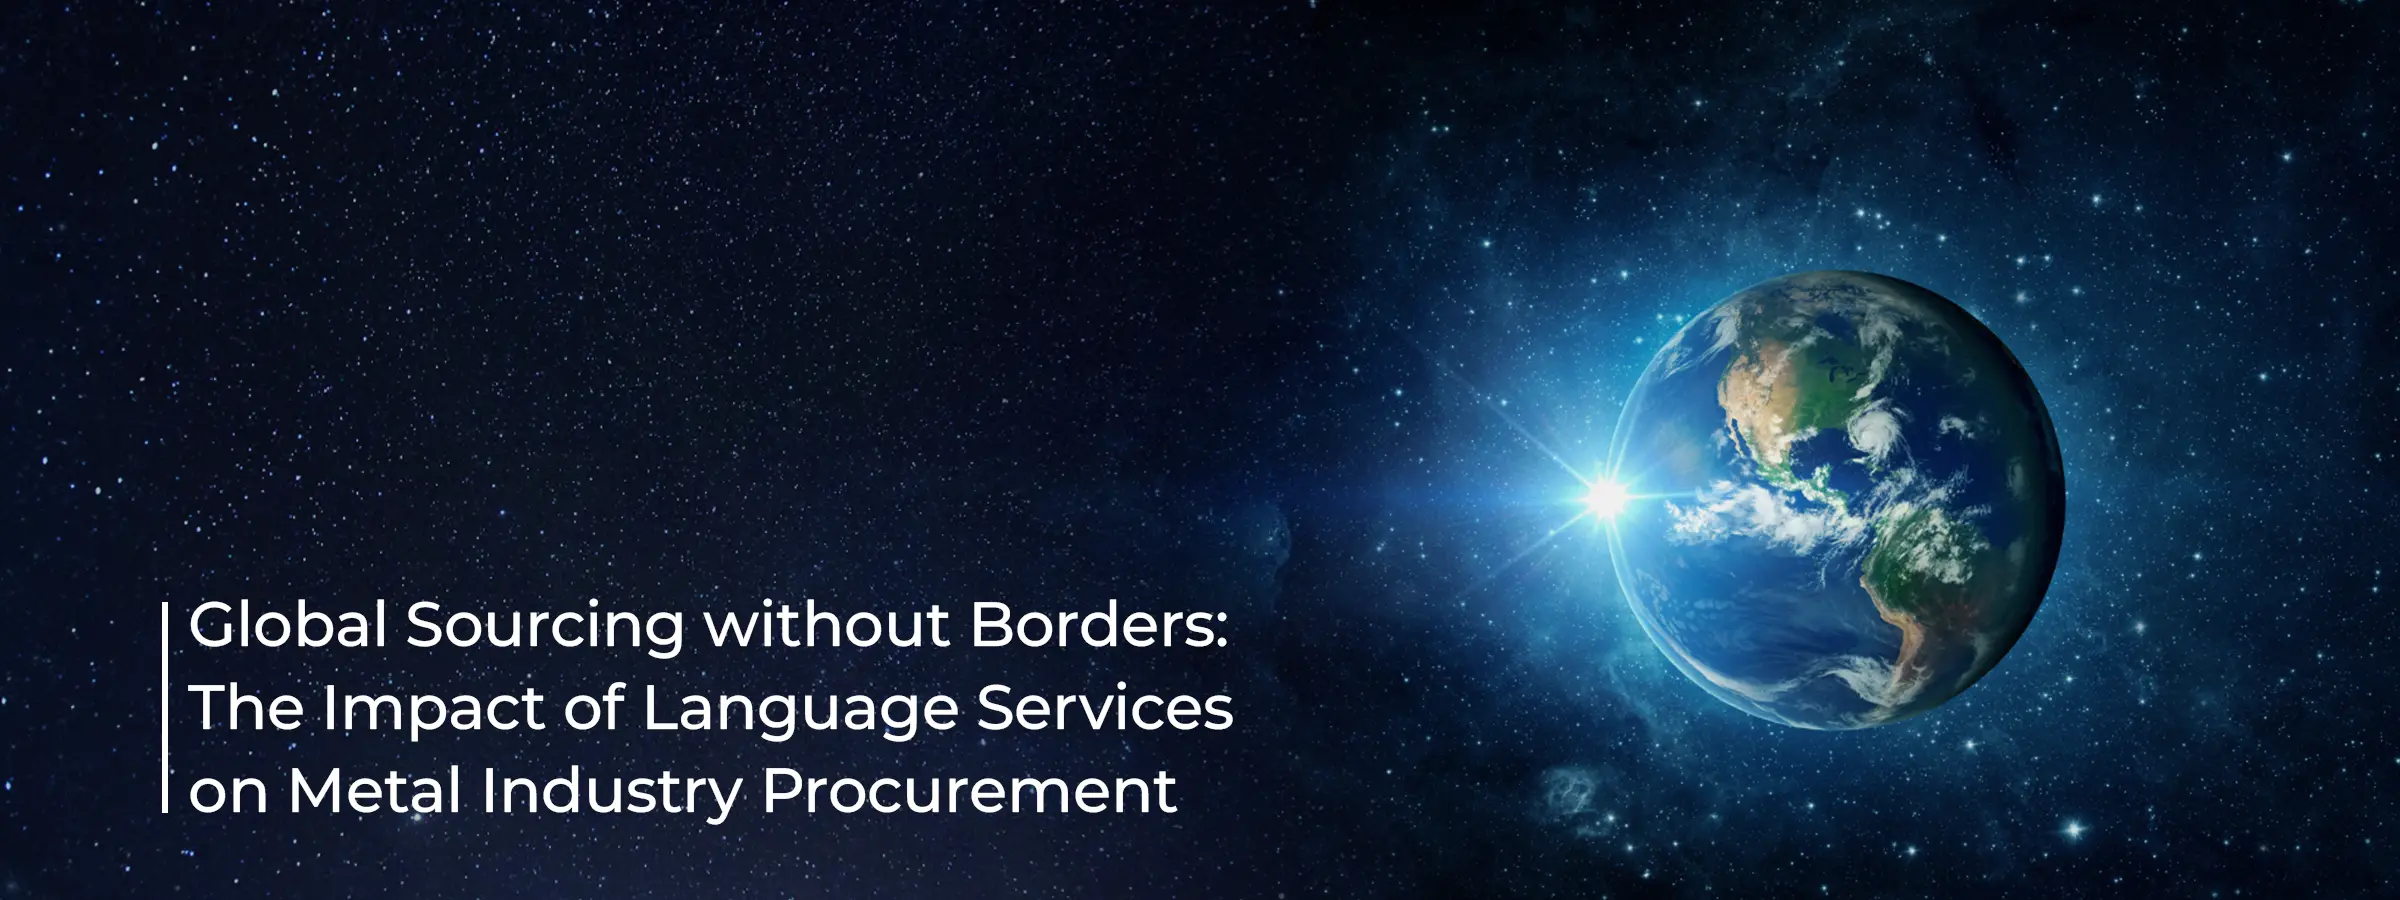 global-sourcing-without-borders-the-impact-of-language-services-on-metal-industry-procurement